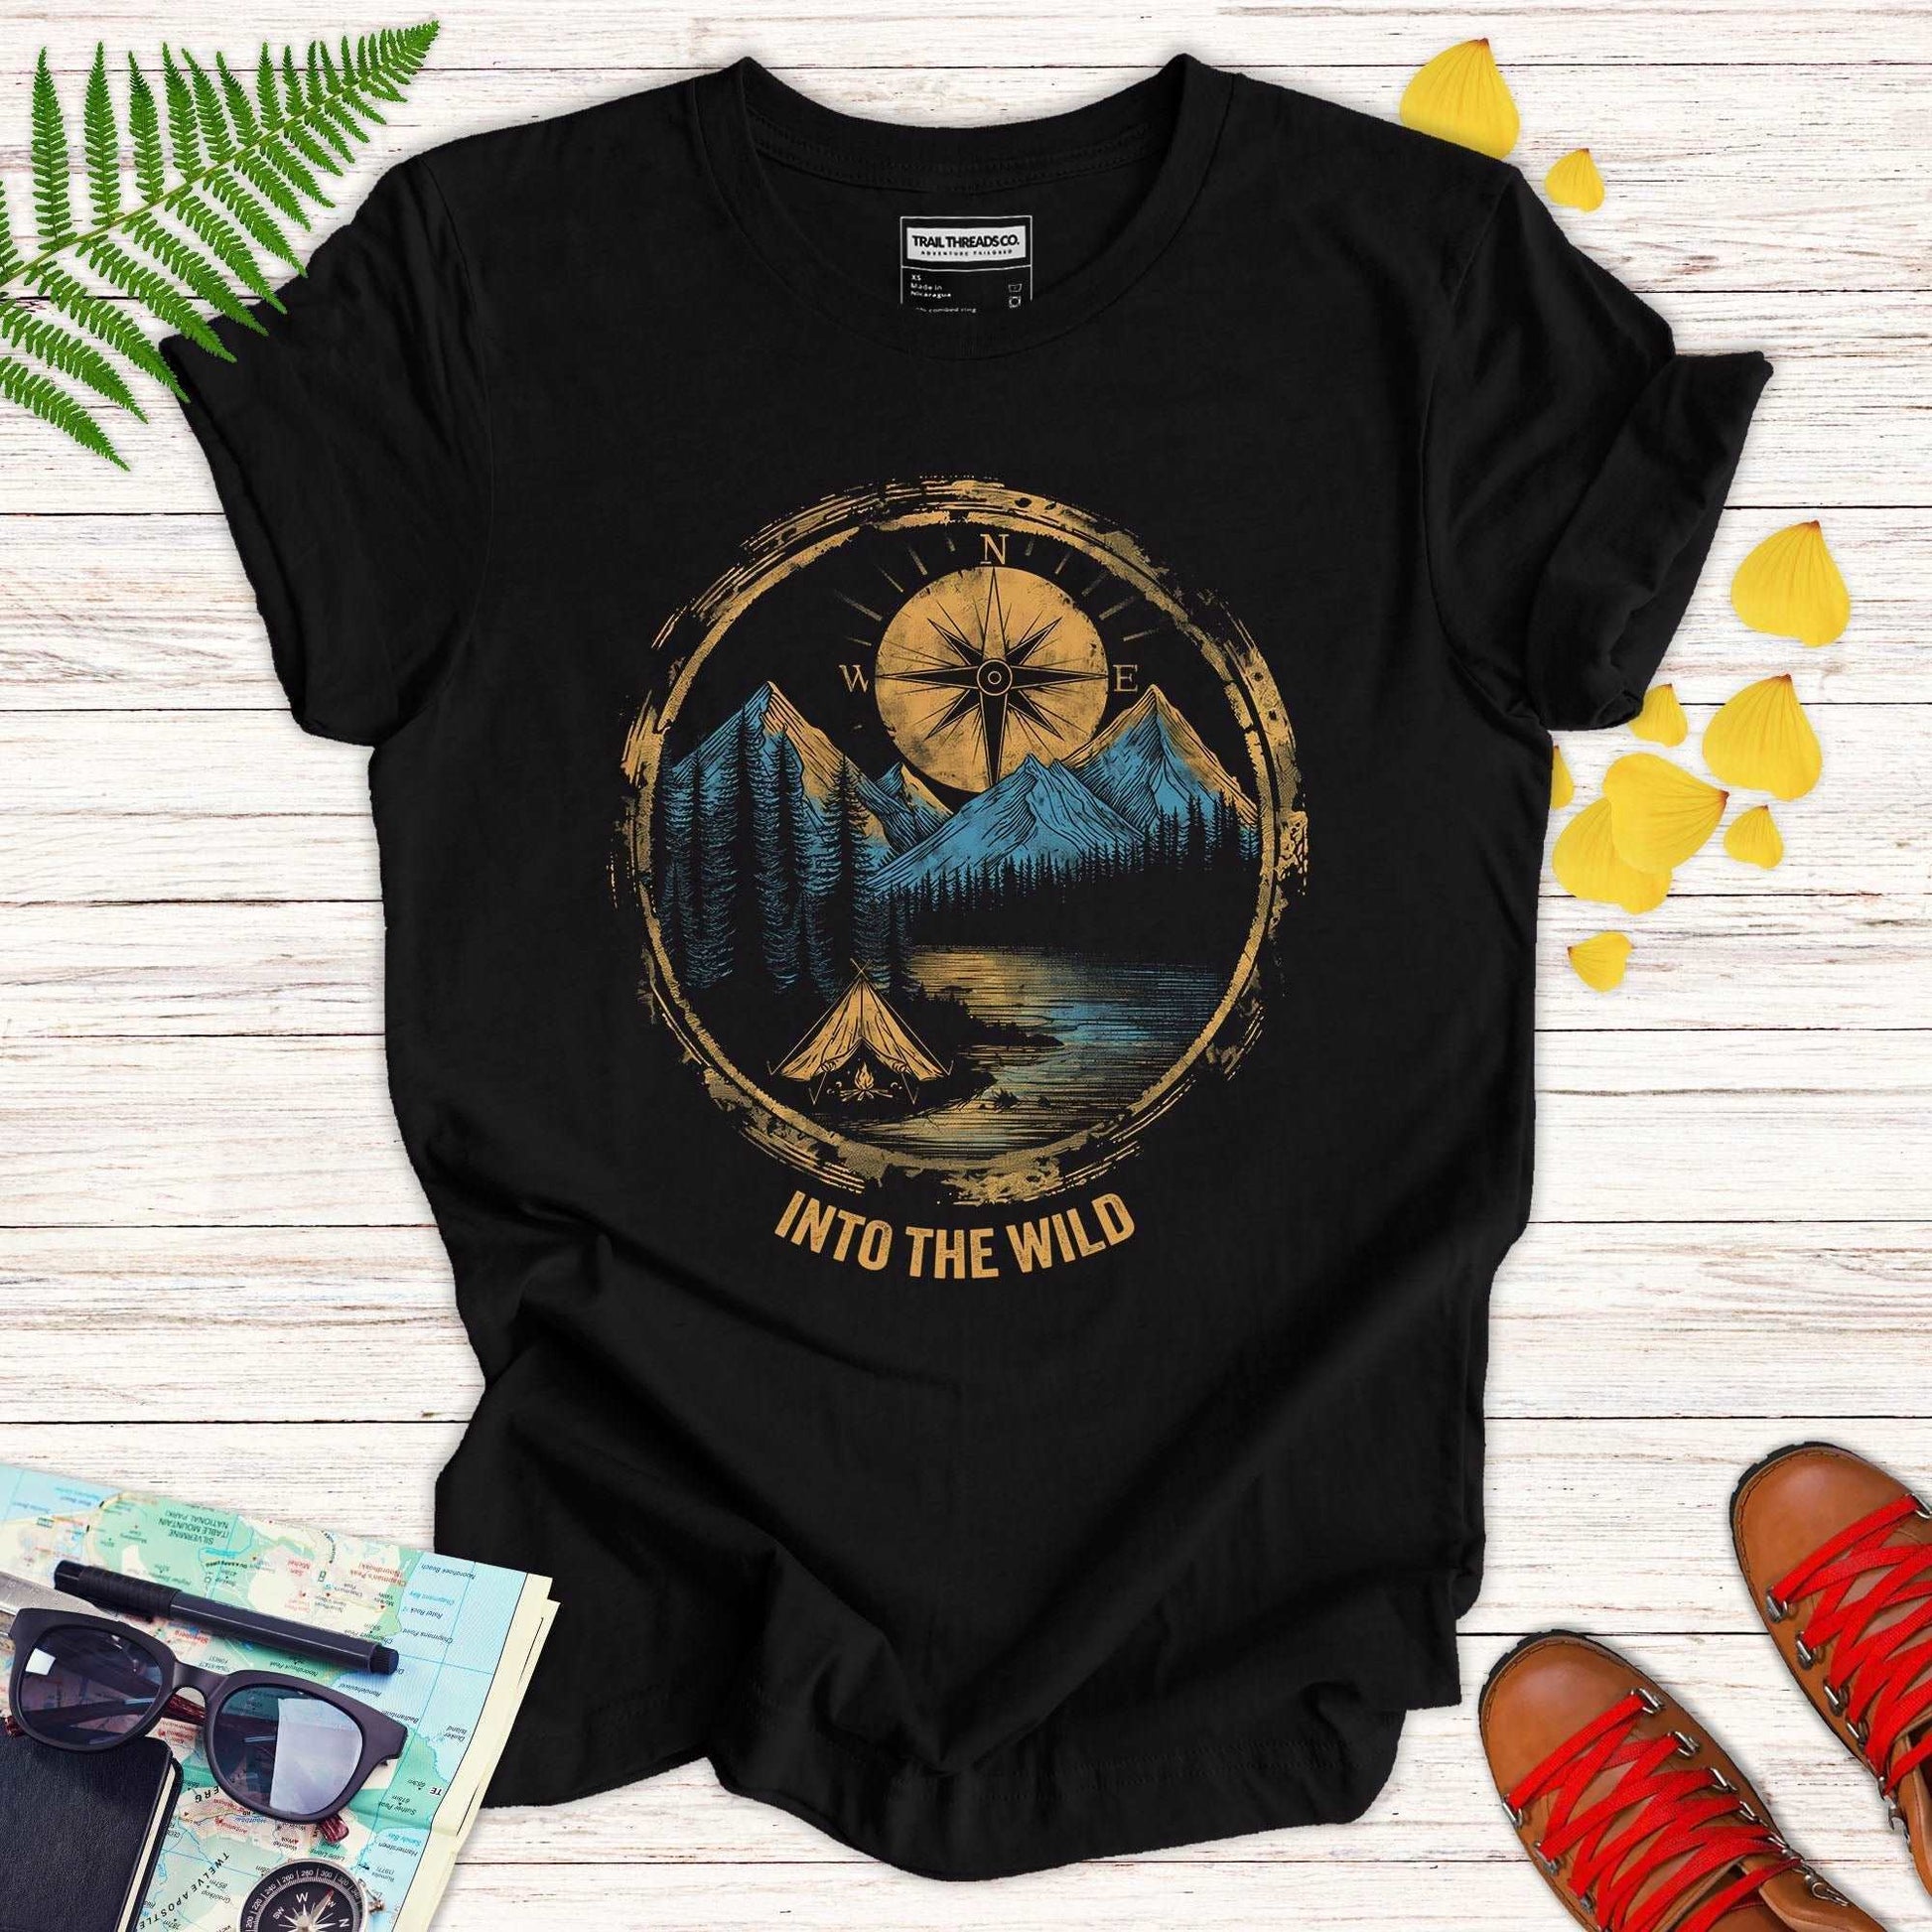 Into the Wild T-shirt